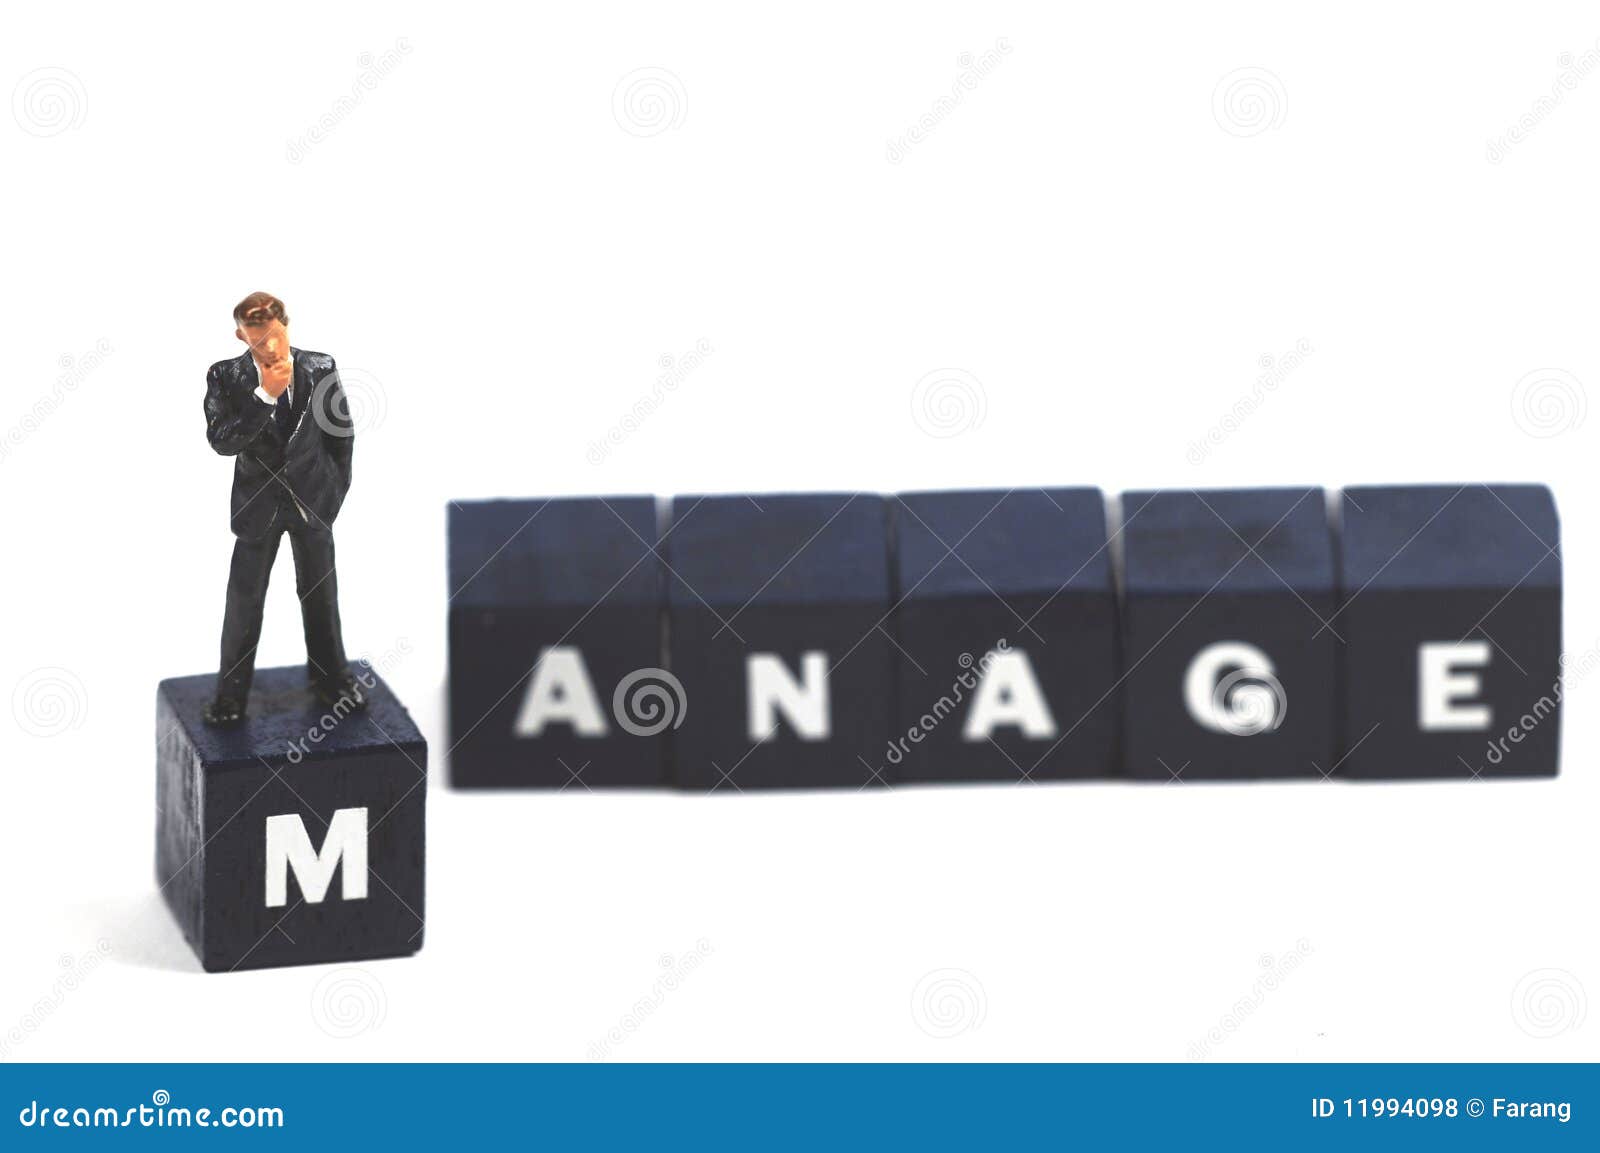 manage your business